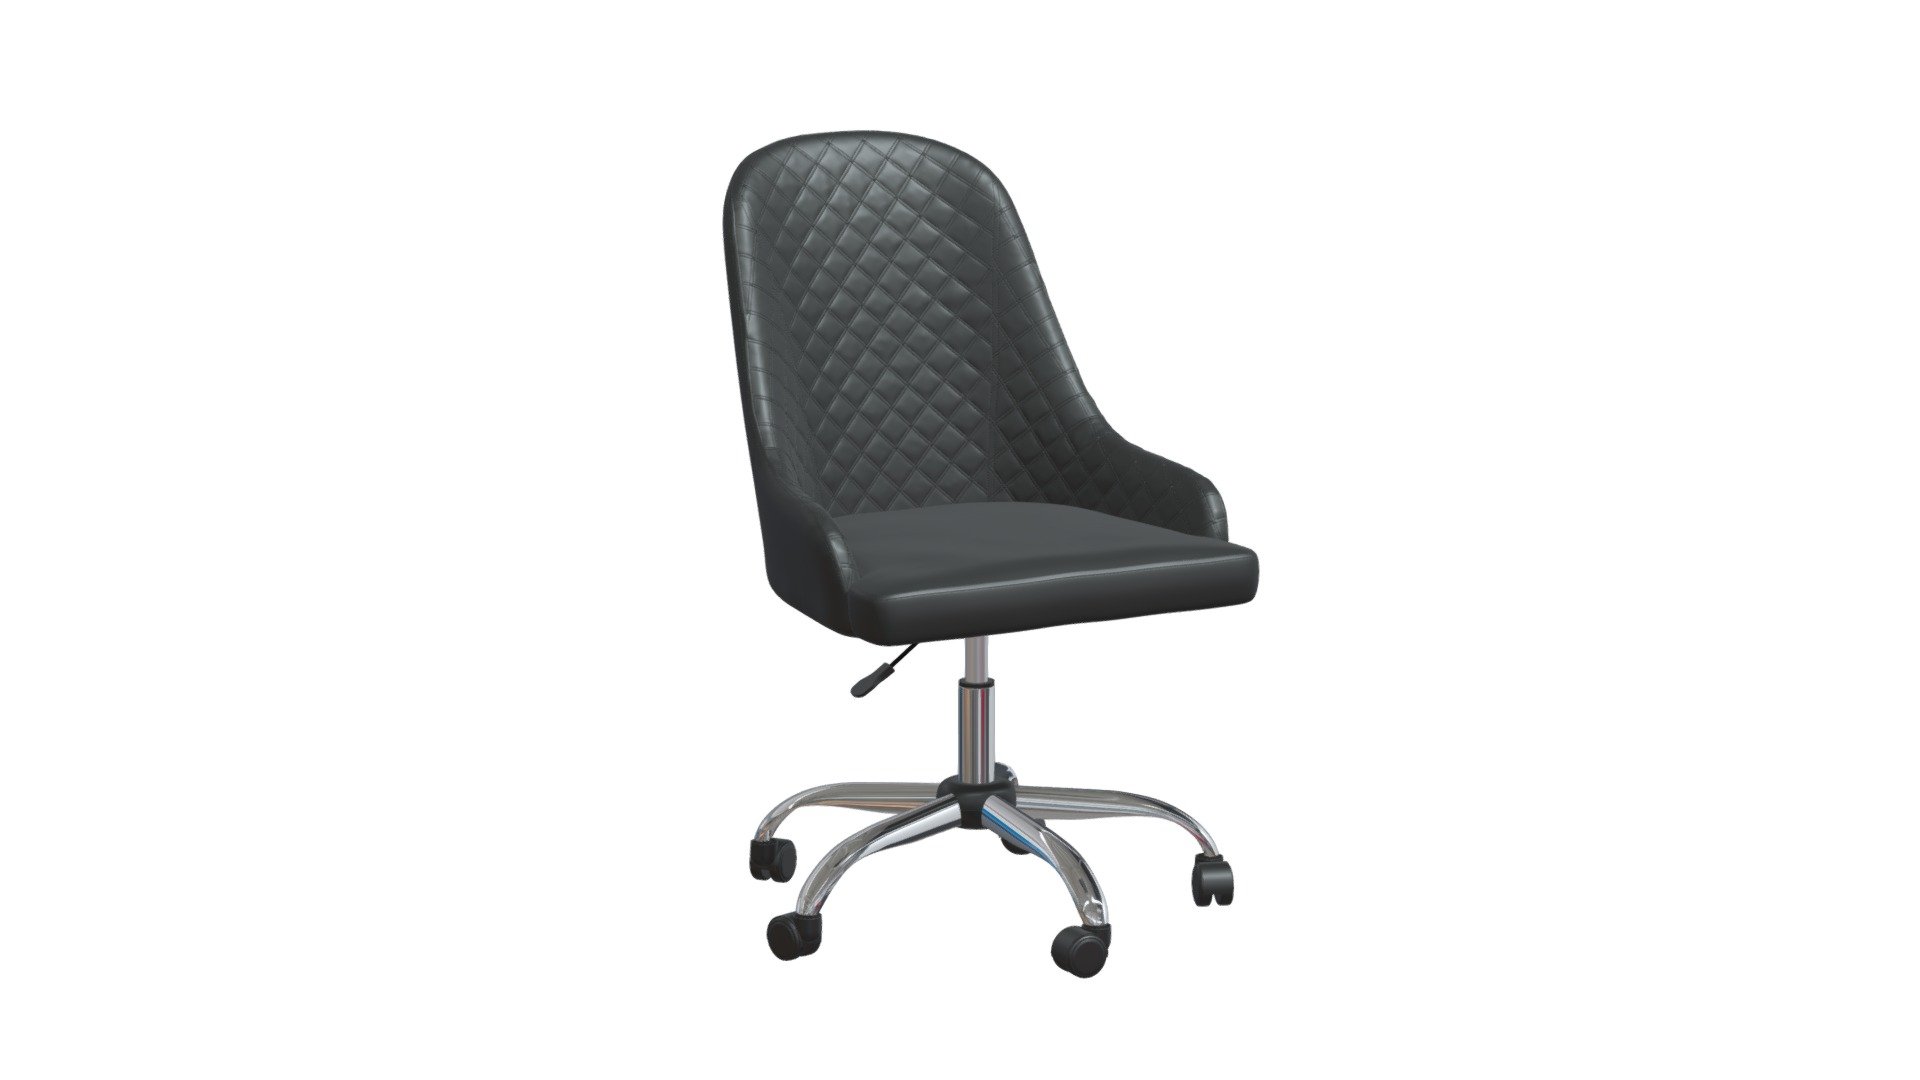 Space Office Chair Black - 101830